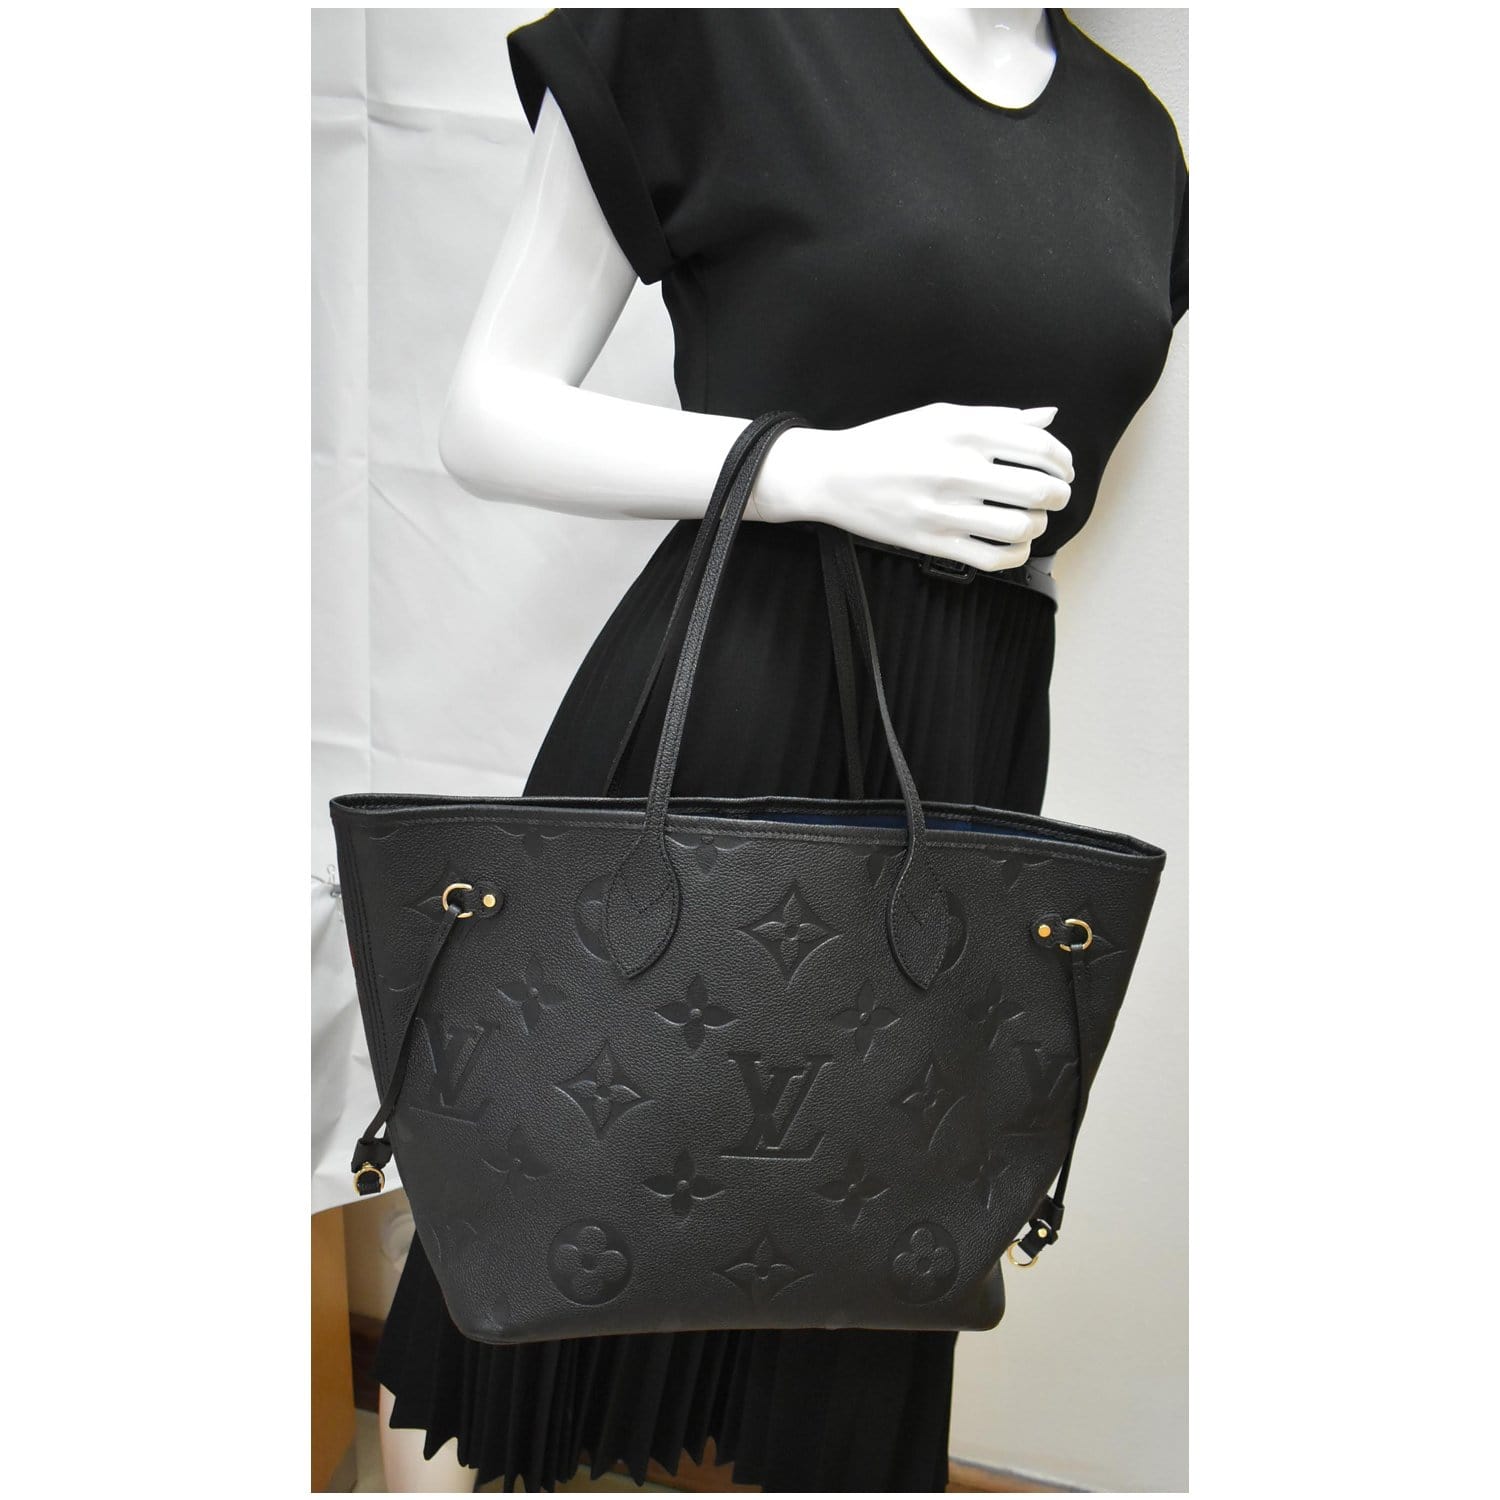 louis black tote leather